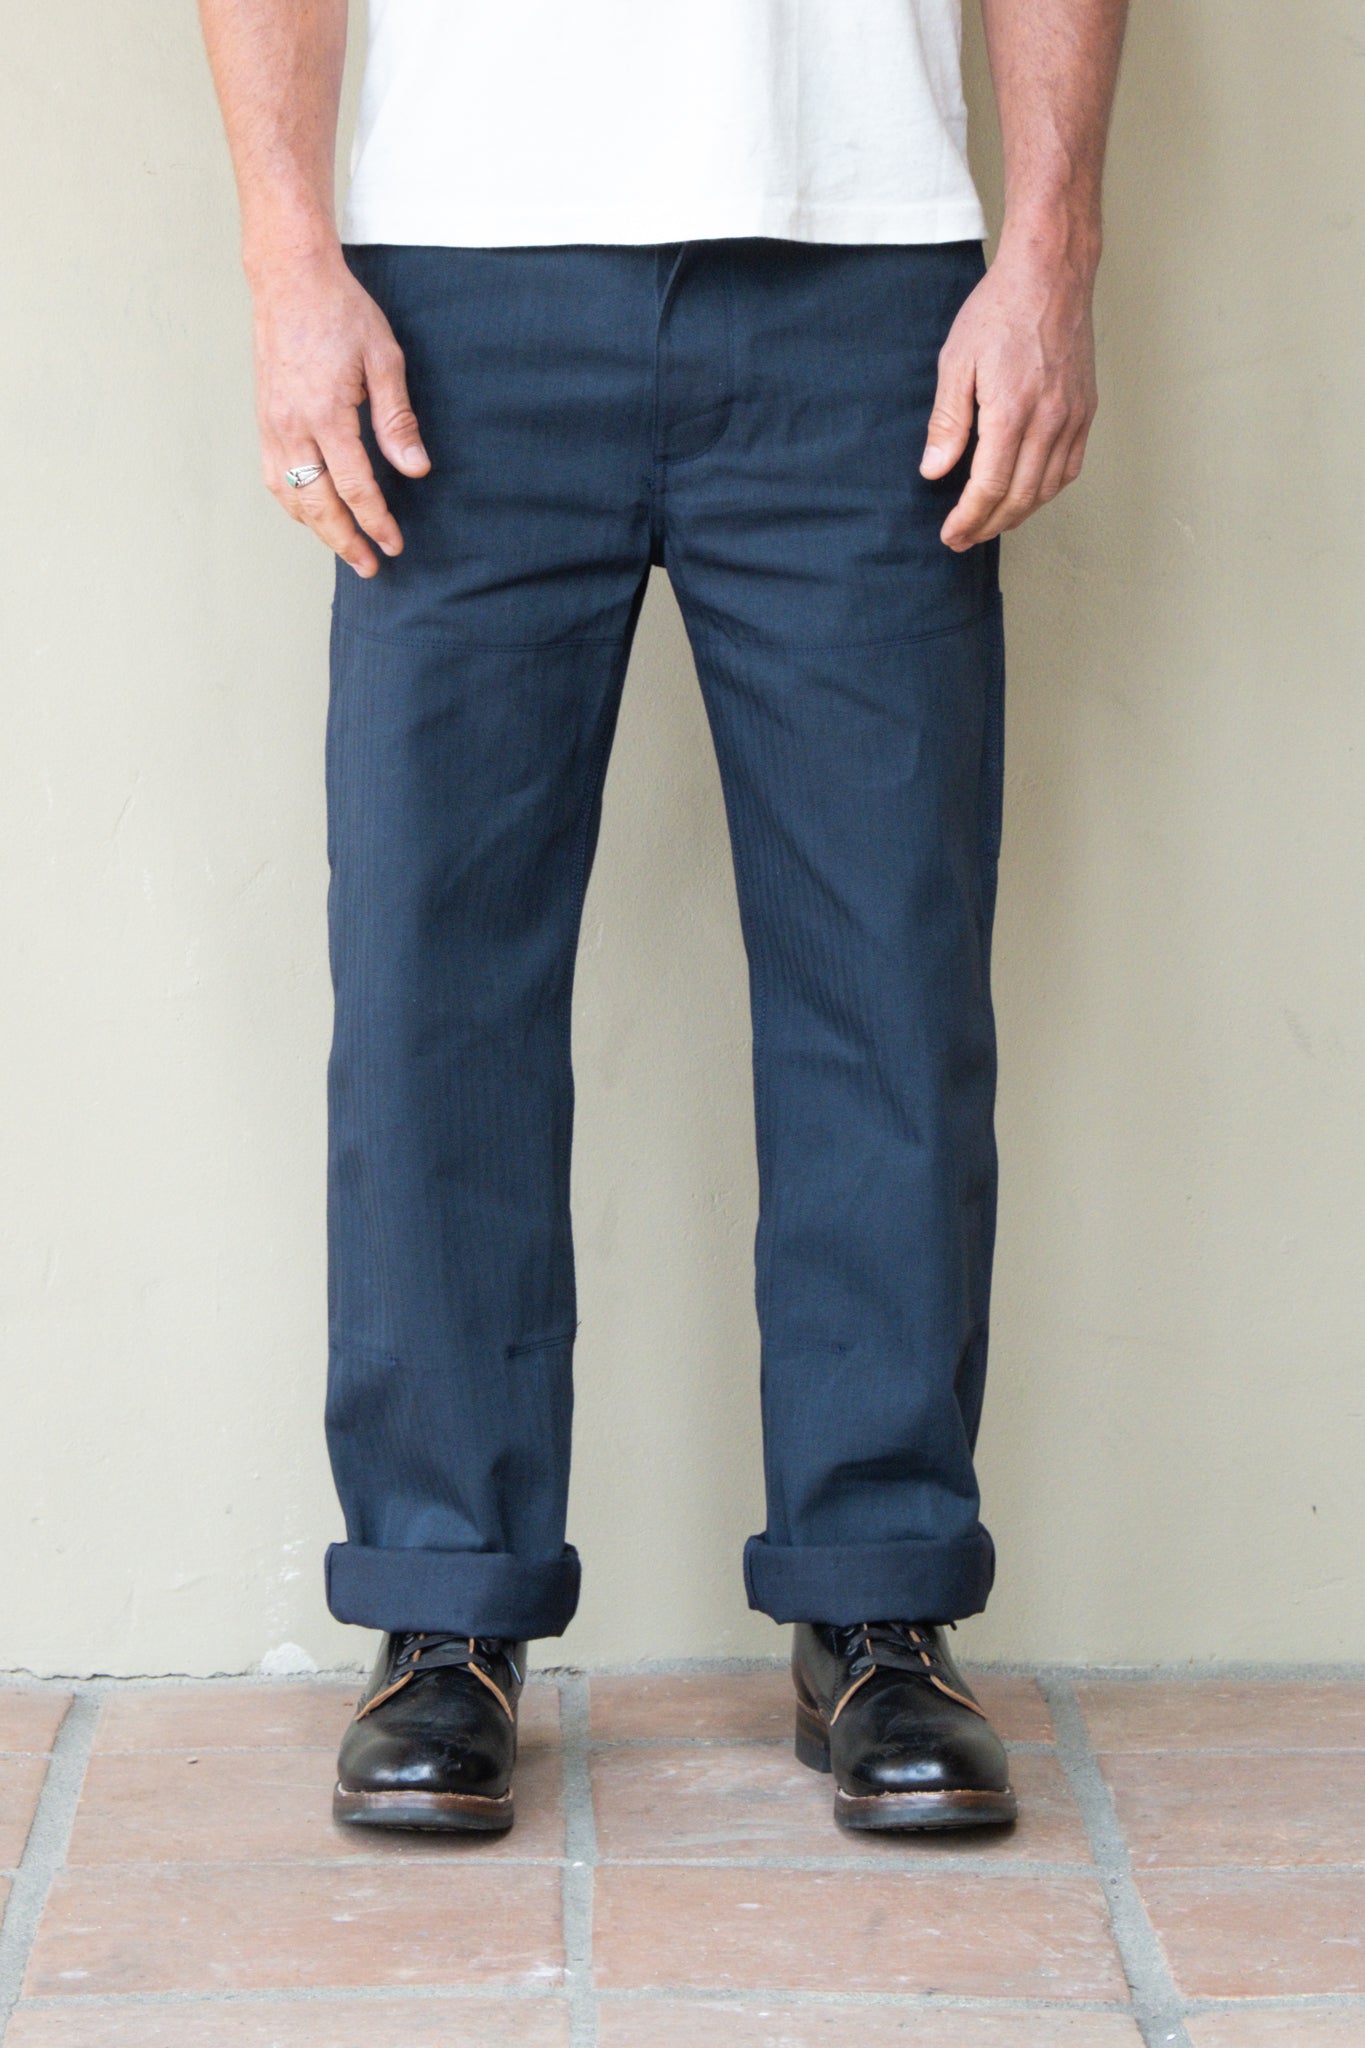 Freenote Cloth Duster Pant in Charcoal - Earl's Authentics